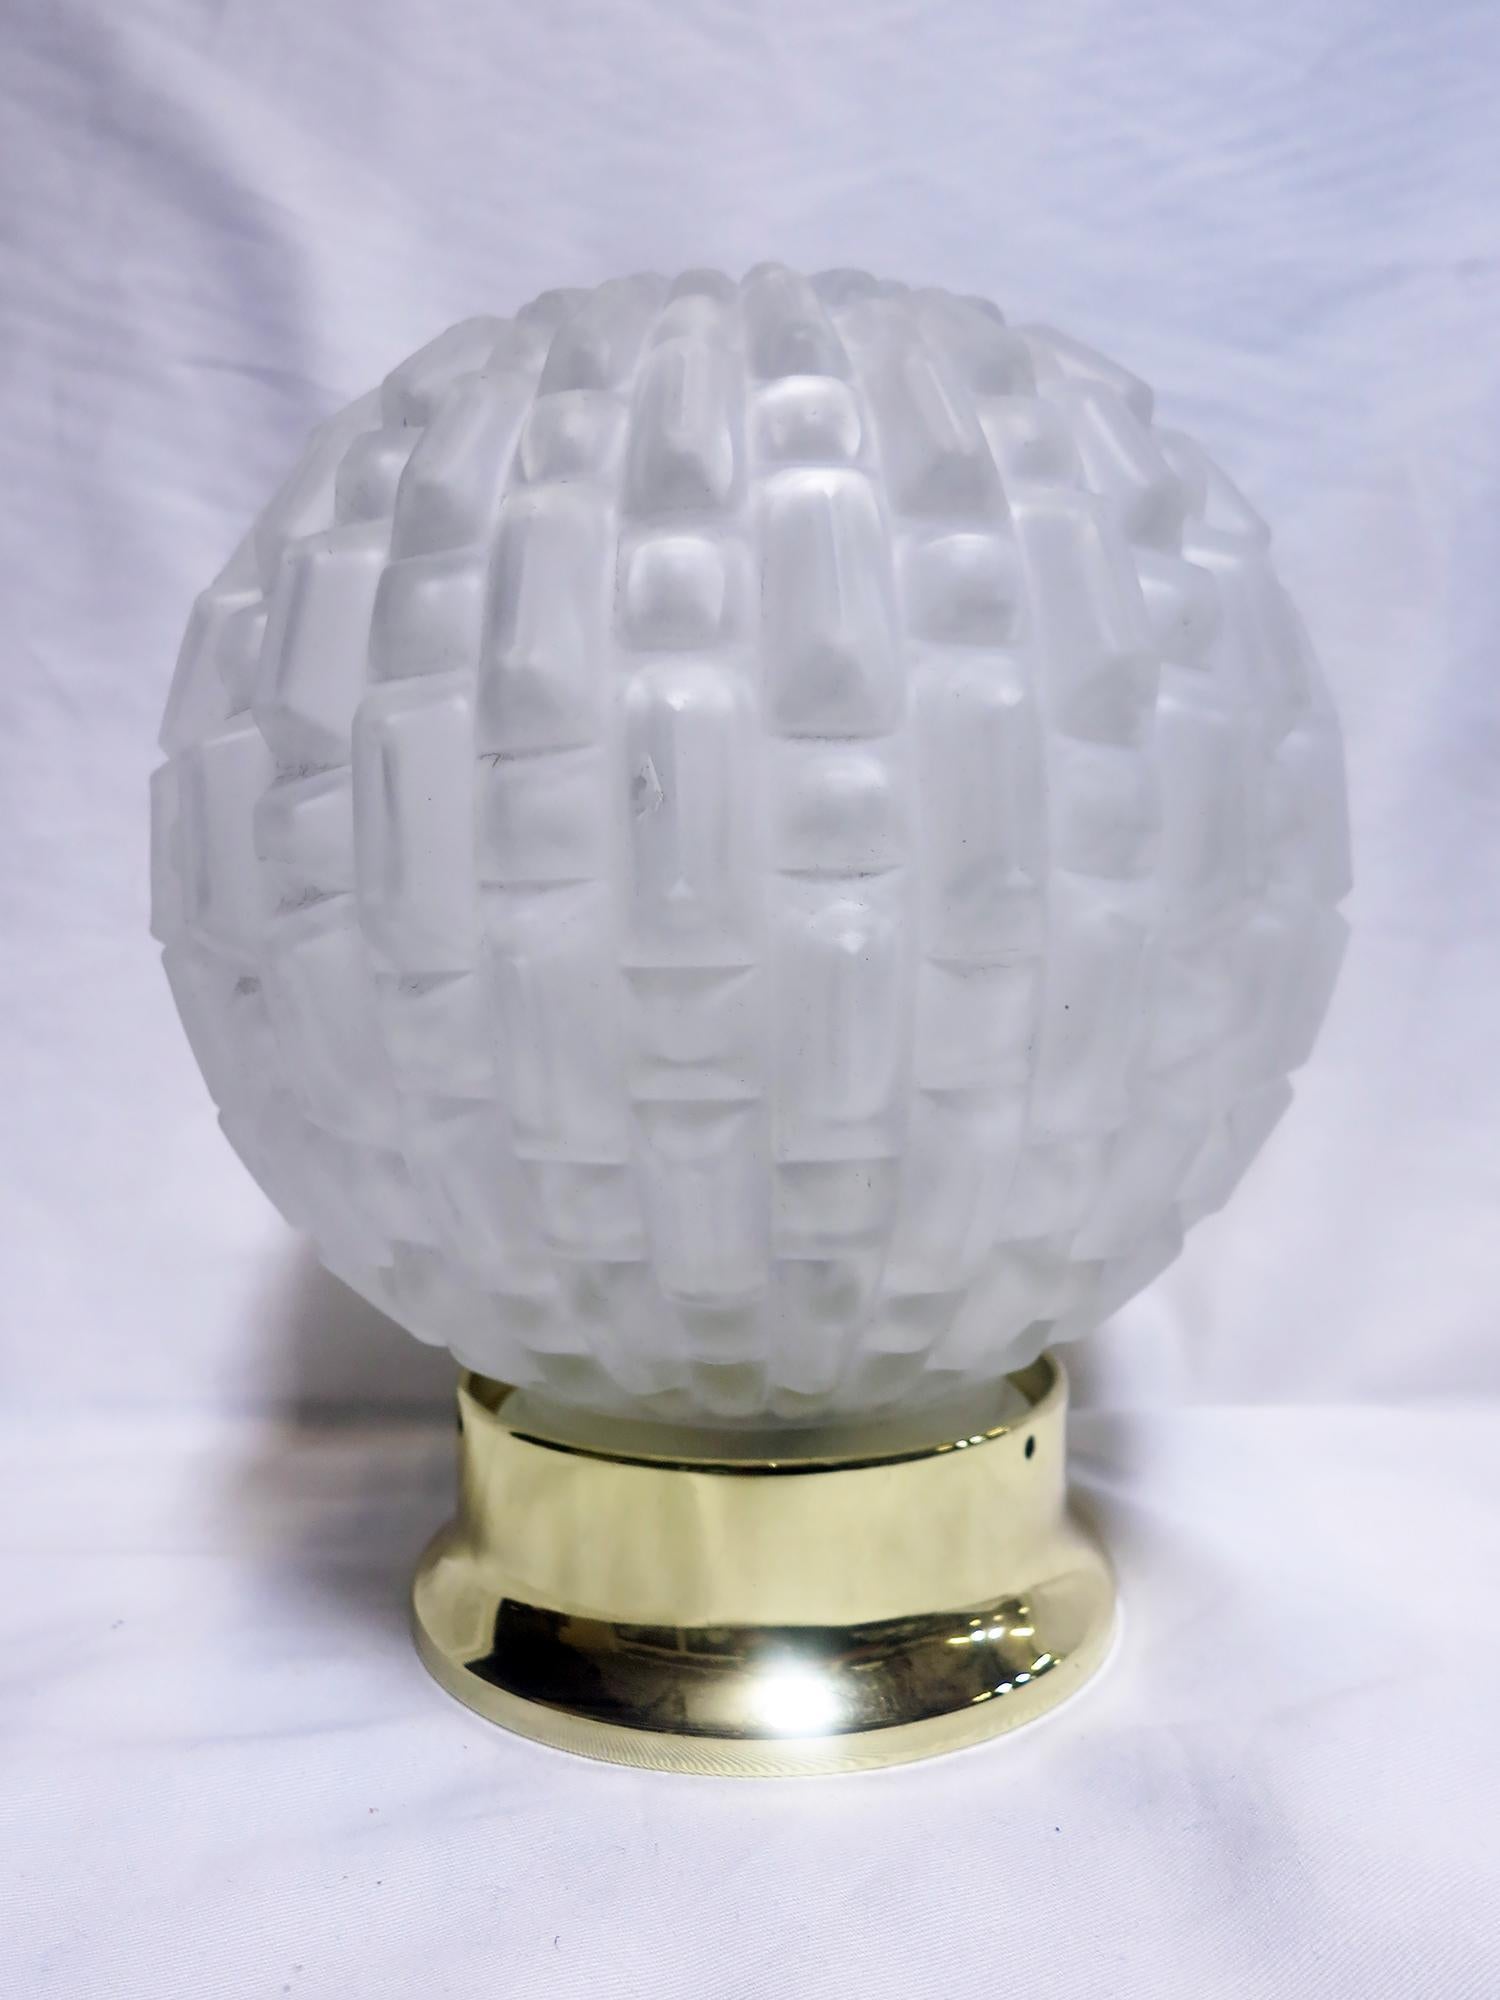 This unique and exquisite French Art Deco sculptural glass globe features a high relief geometric pattern with symmetrical lines and angles distinctive throughout the Deco period. Available with a new brass or chrome 4